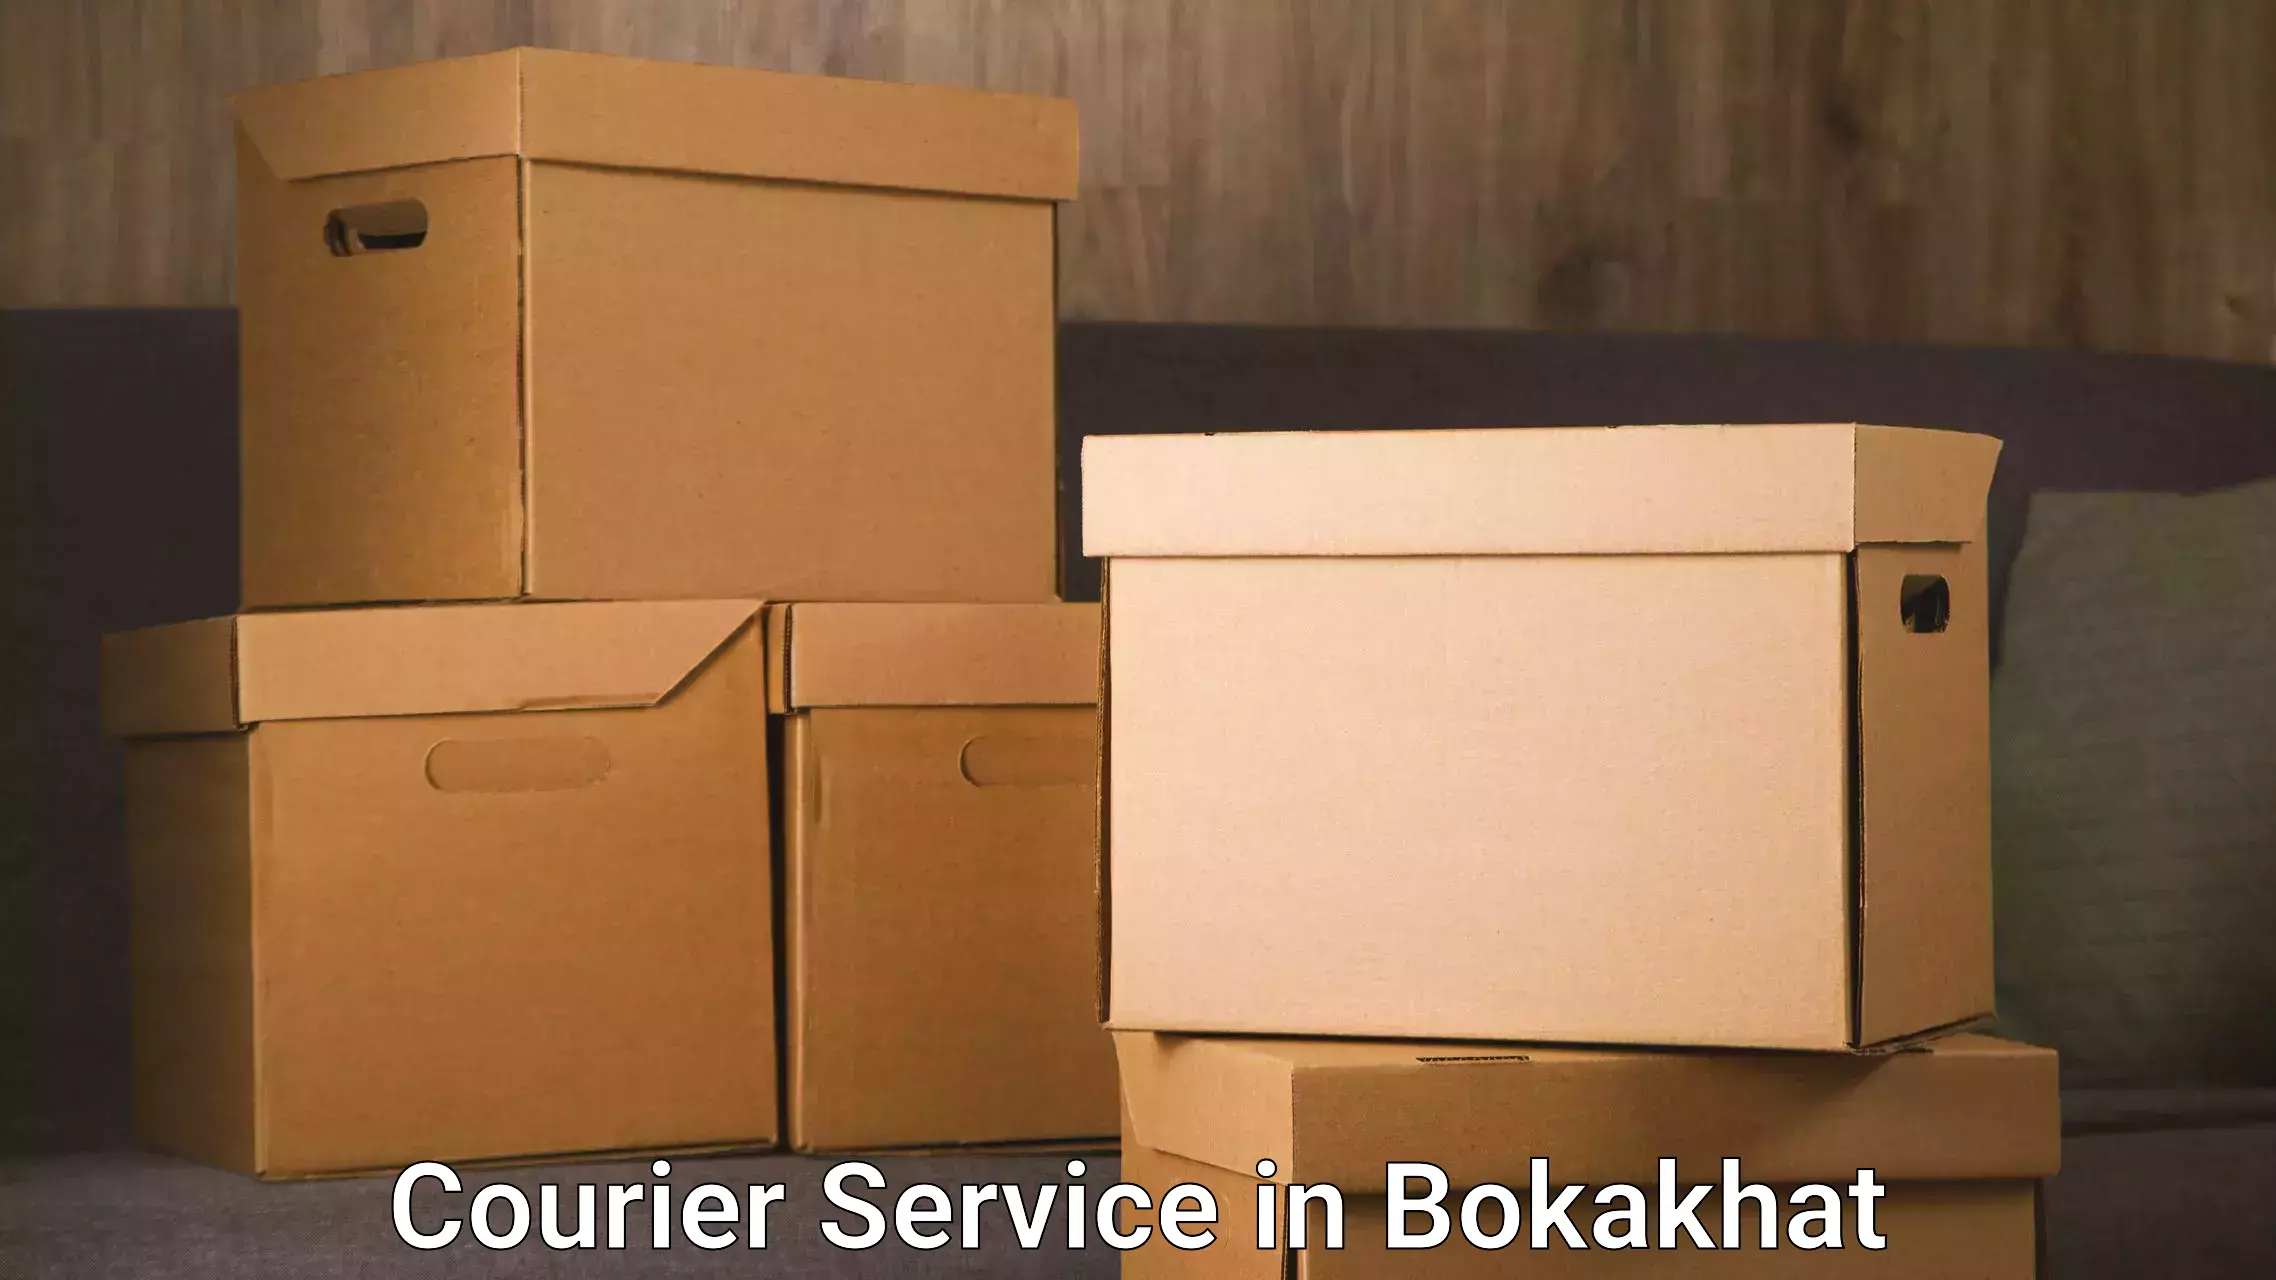 Fast shipping solutions in Bokakhat